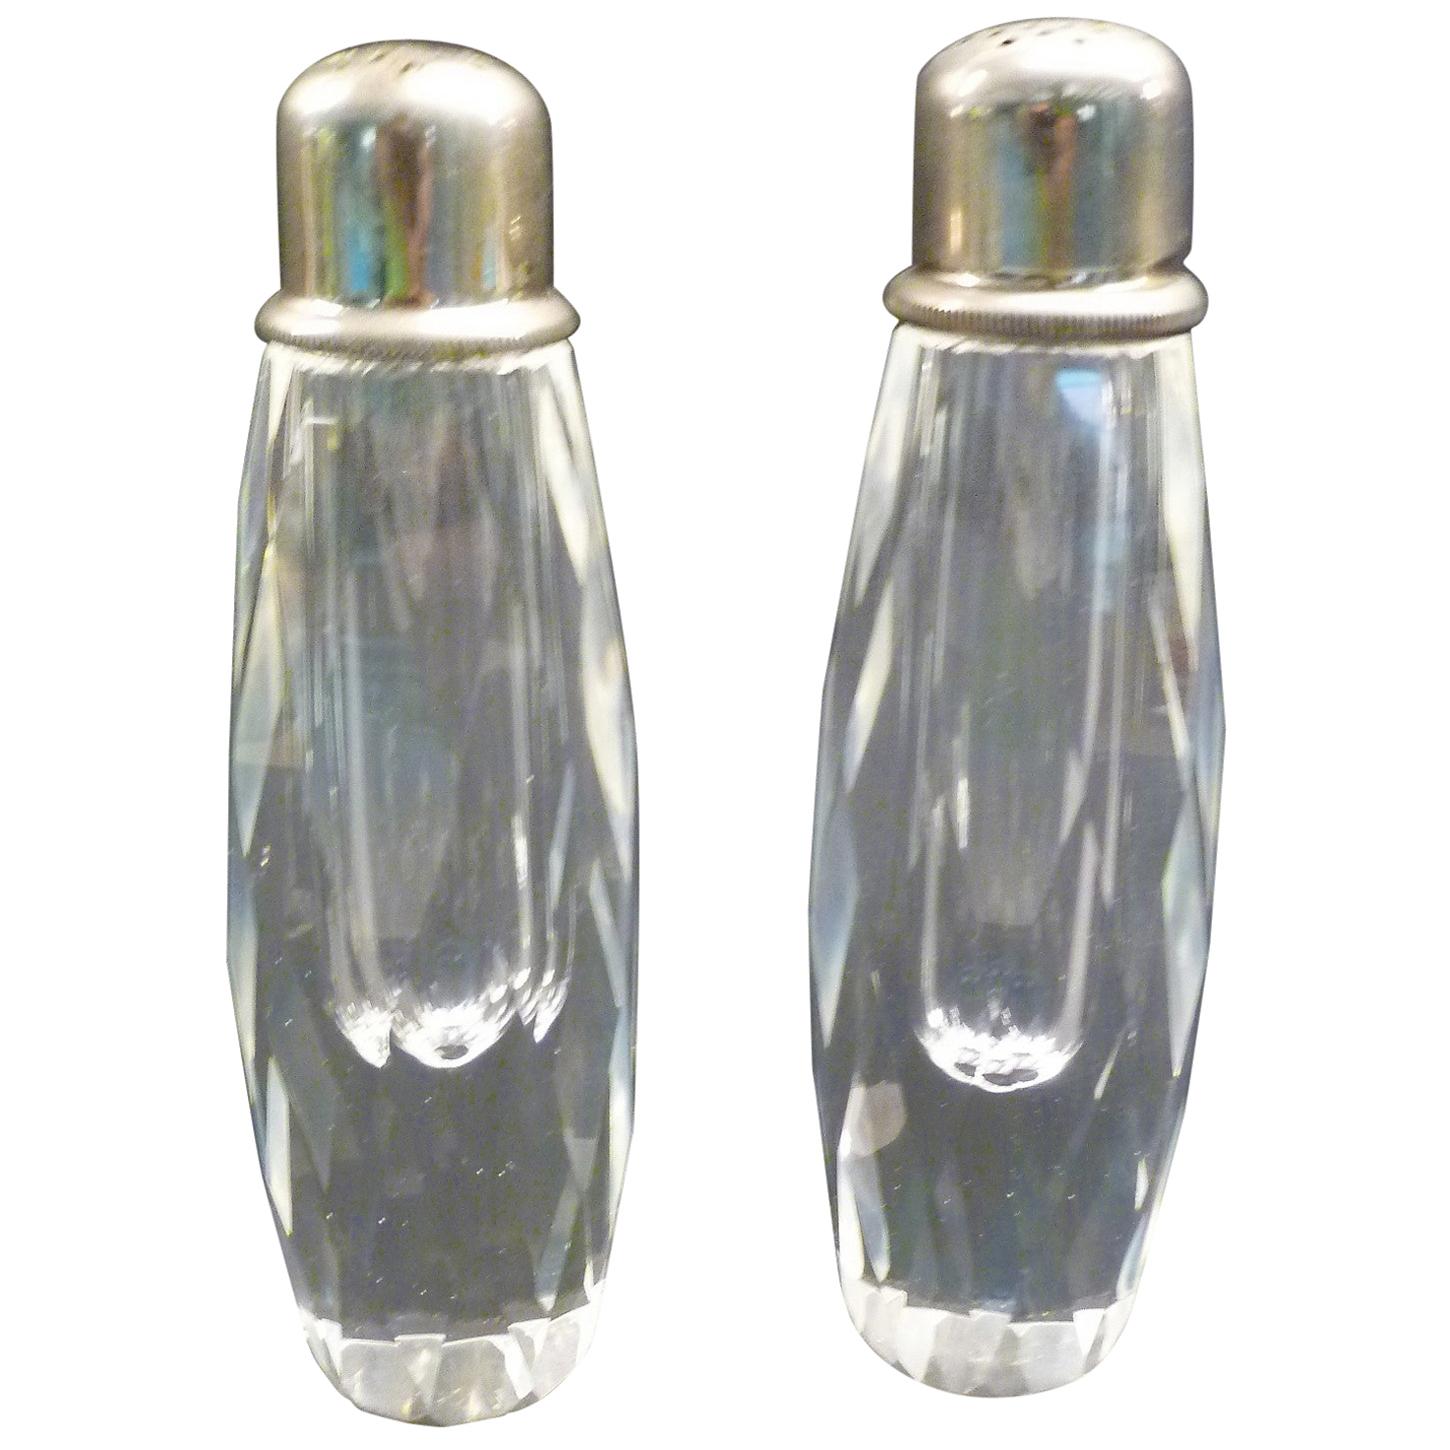 FREE SHIPPING Mid-Century Style Salt and Pepper Shakers Vintage Pressed Glass Salt & Pepper Shakers Classic Circa 1960s